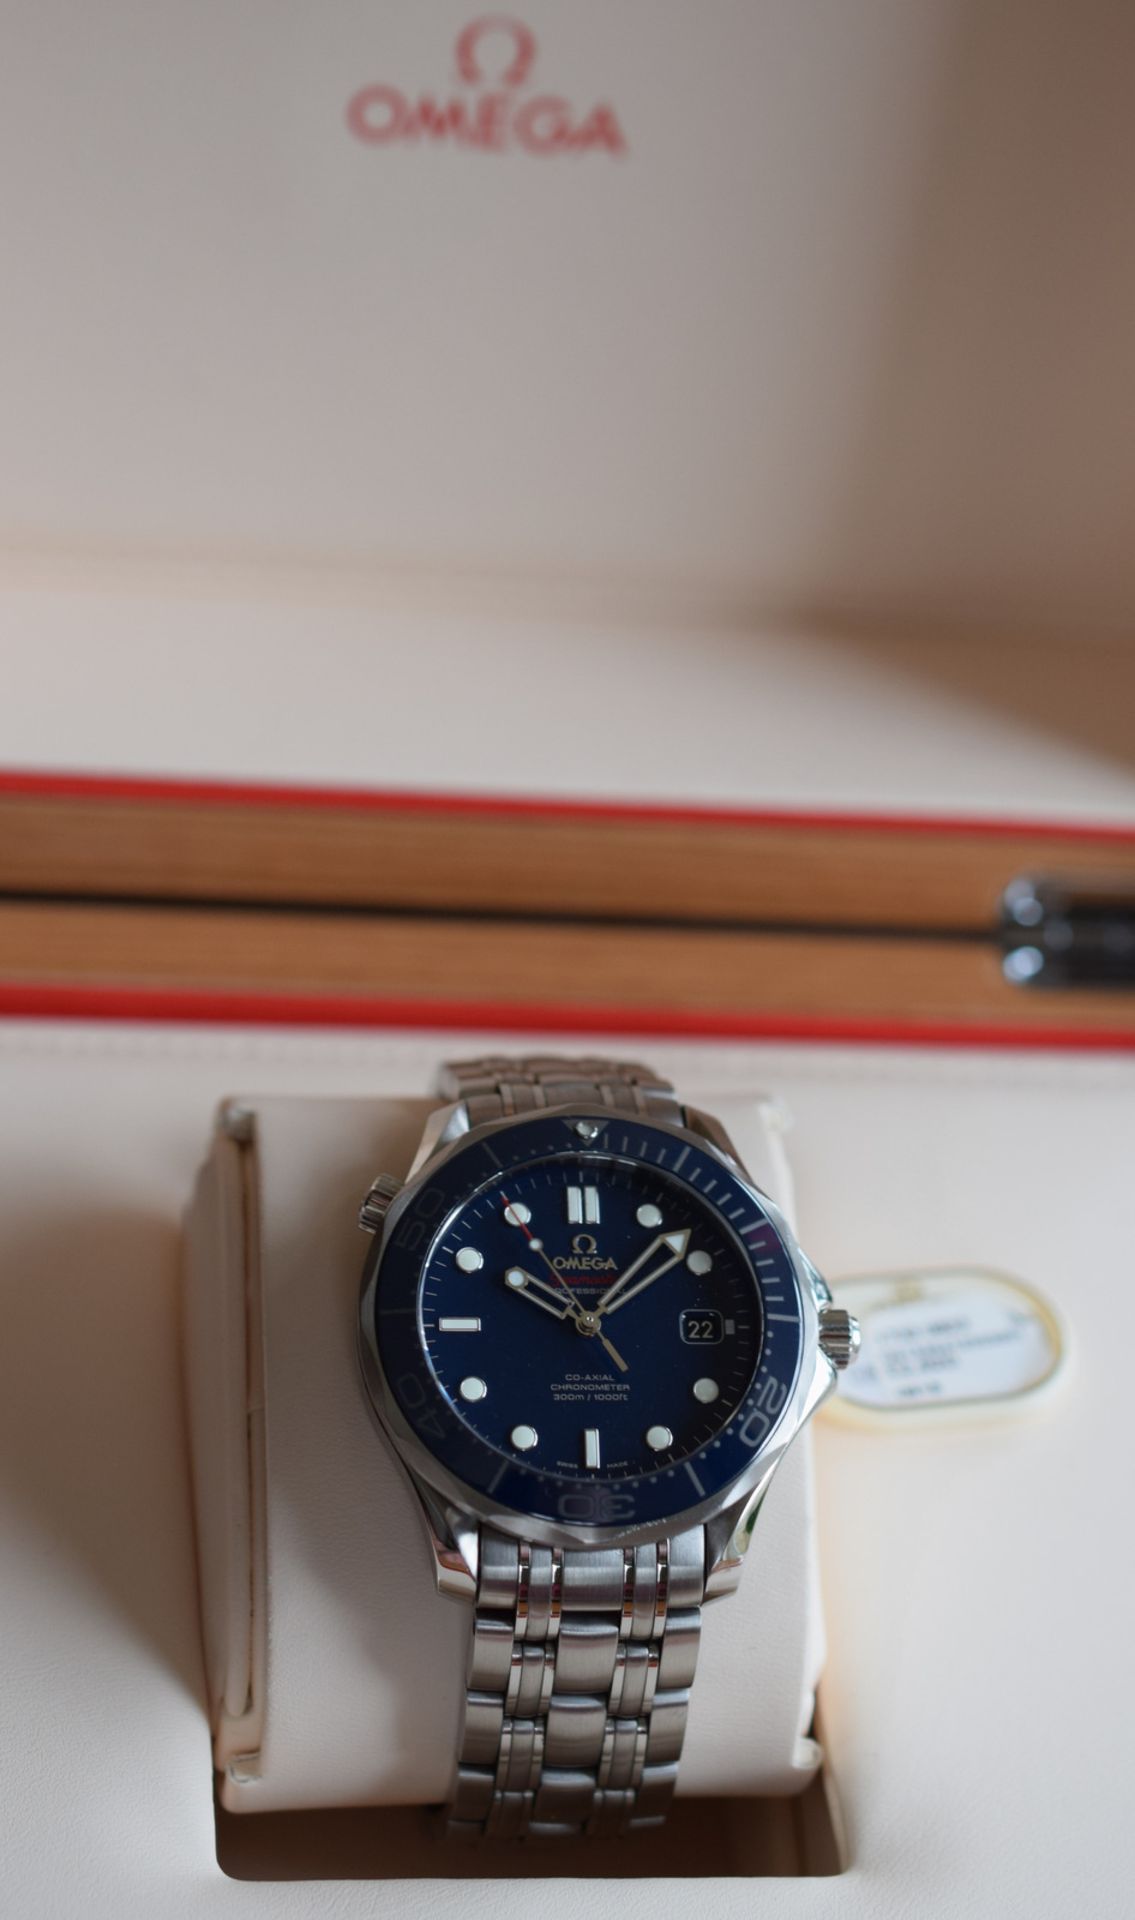 Excellent Omega Seamaster Co-Axial Chronometer Full Set - Image 2 of 15